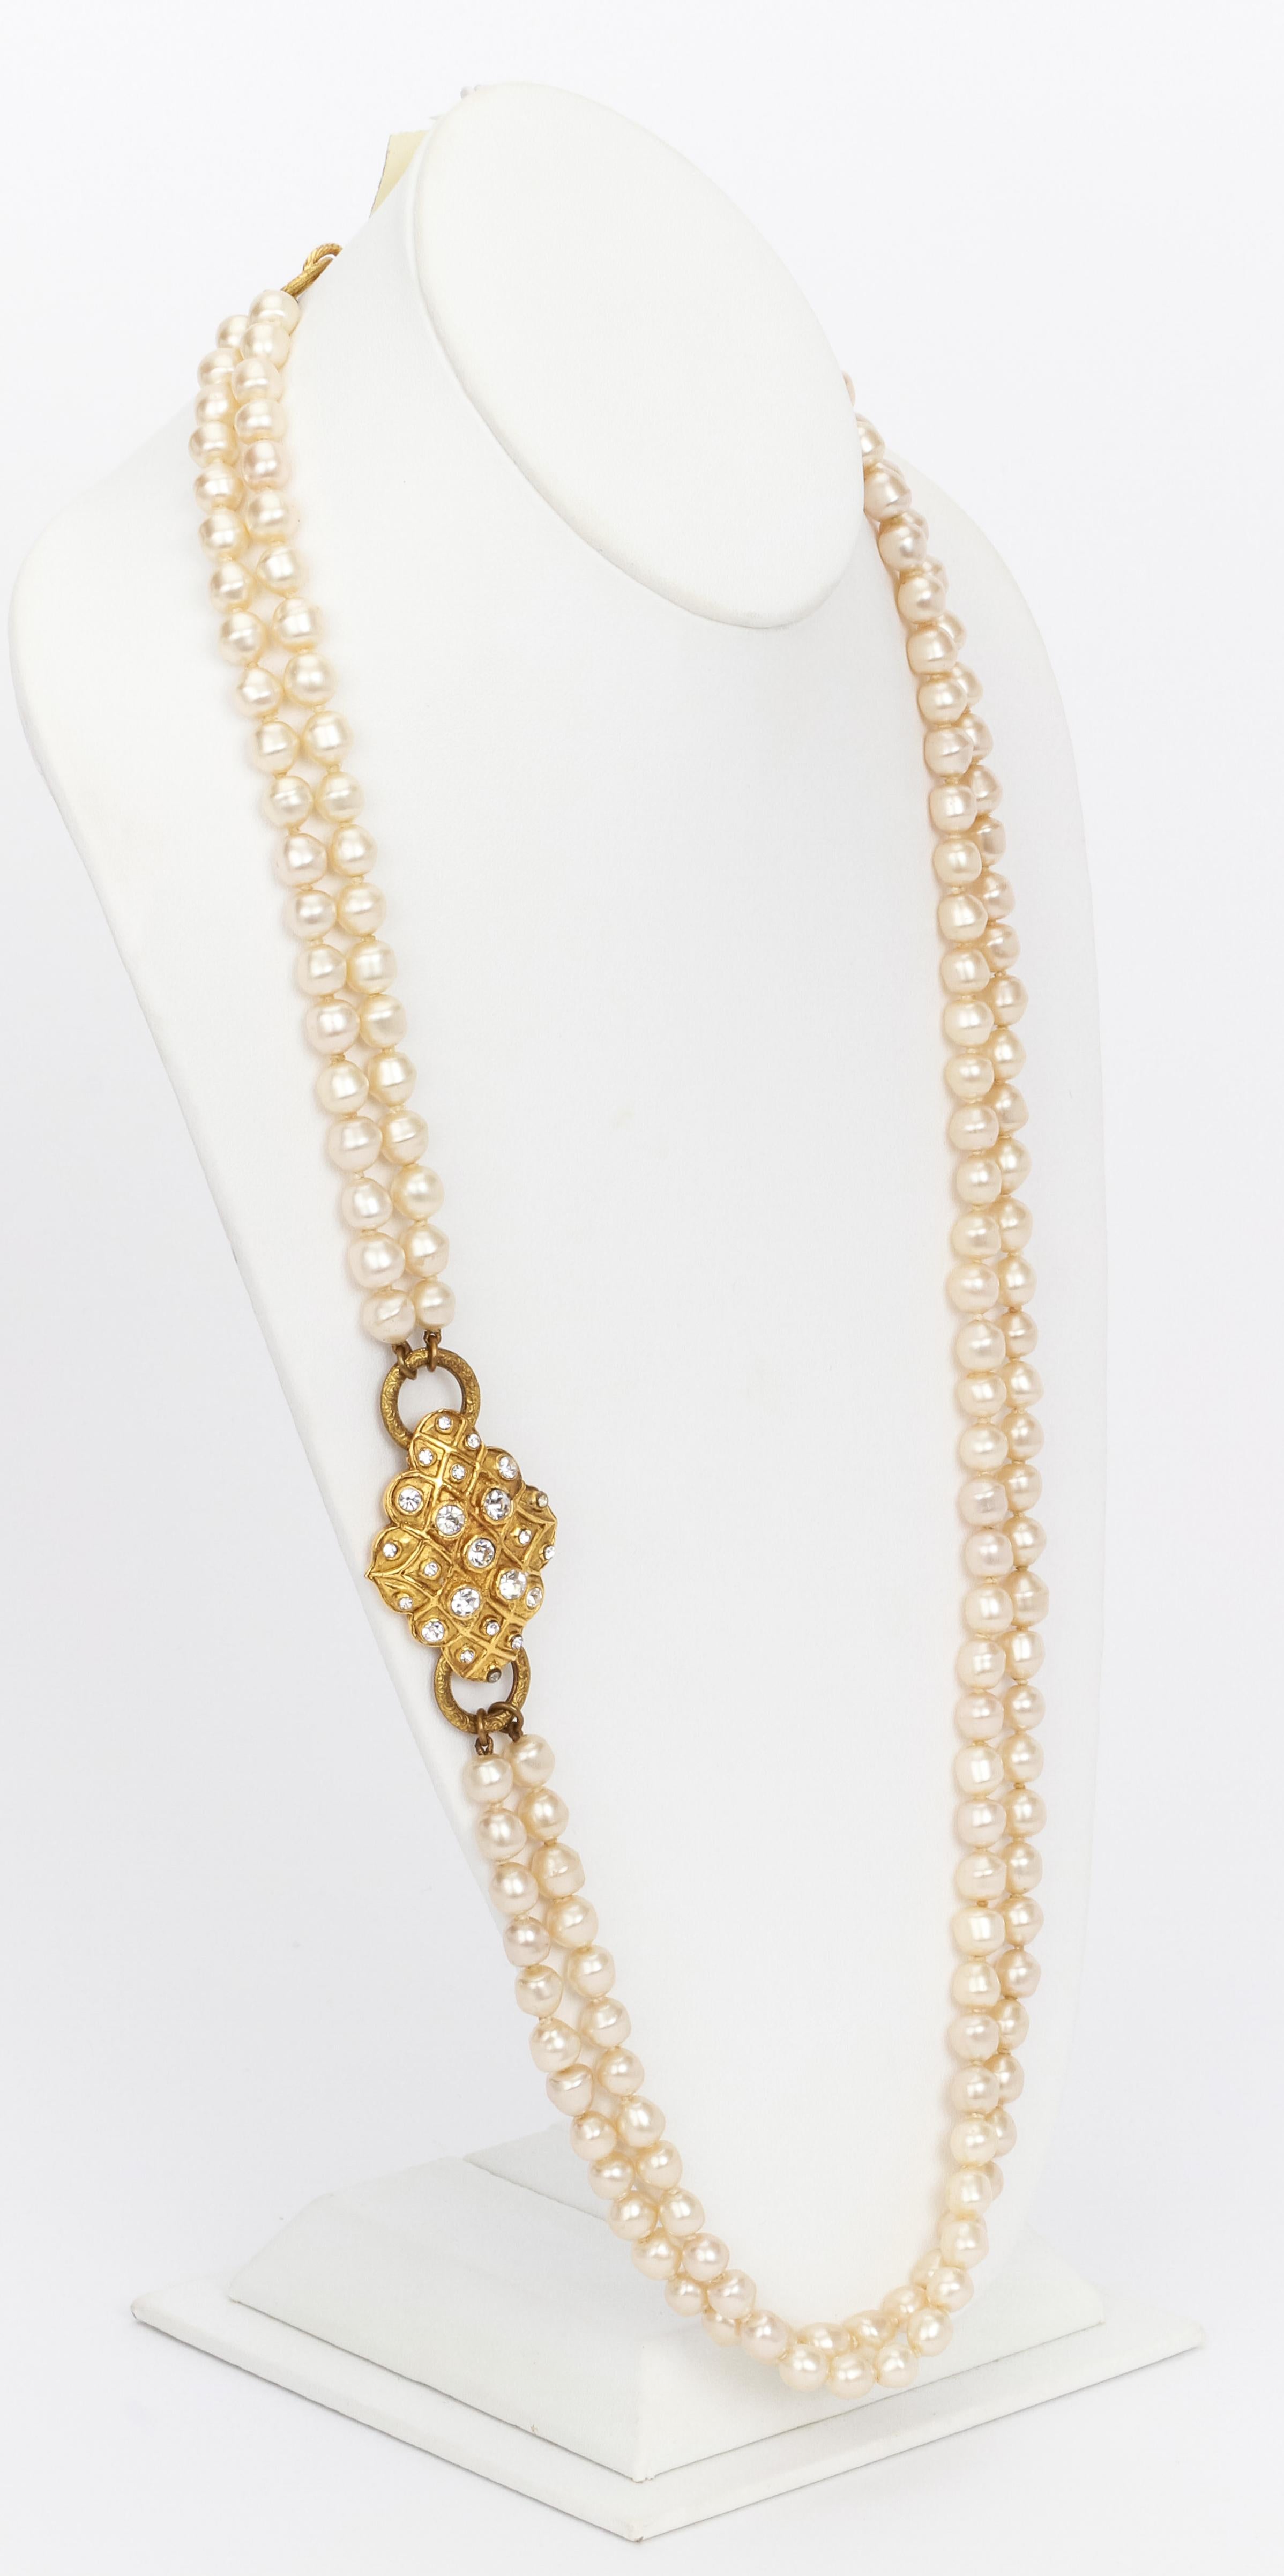 Chanel two strand pearl necklace with oblong decorative gold medallion featuring a quilted motif, each diamond shaped section decorated with a rhinestone in different sizes. Vintage 1970s in pristine conditions.
